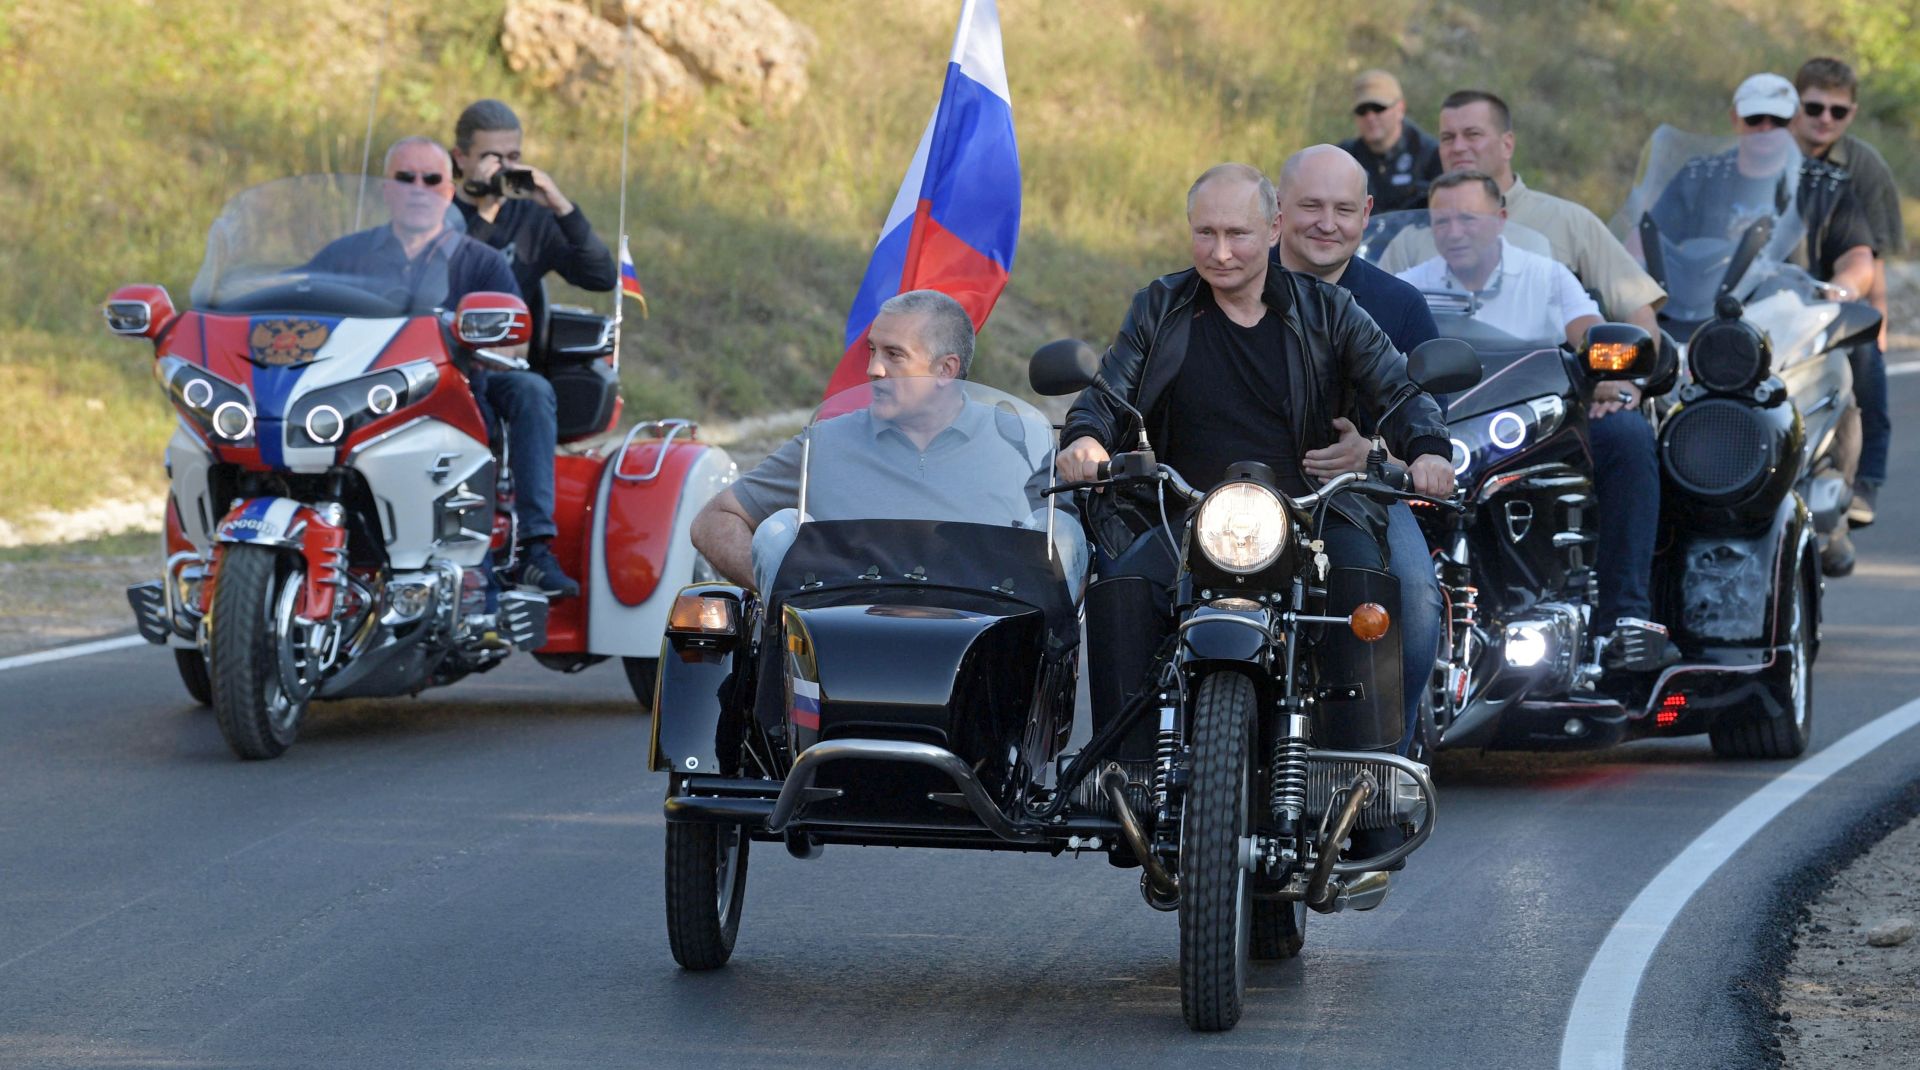 epa07768102 Russian President Vladimir Putin (C) rides an Ural motorbike before the Babylon's Shadow bike show in Sevastopol, Crimea, 10 August 2019. Putin and the Night Wolves bikers took part in an annual show organised by the motorcycle club in the Black Sea peninsula, annexed by Russia from Ukraine in March 2014, while tens of thousands of people on 10 August protested against Putin's government following local election violations.  EPA/ALEXEI DRUZHININ / SPUTNIK / KREMLIN POOL / POOL